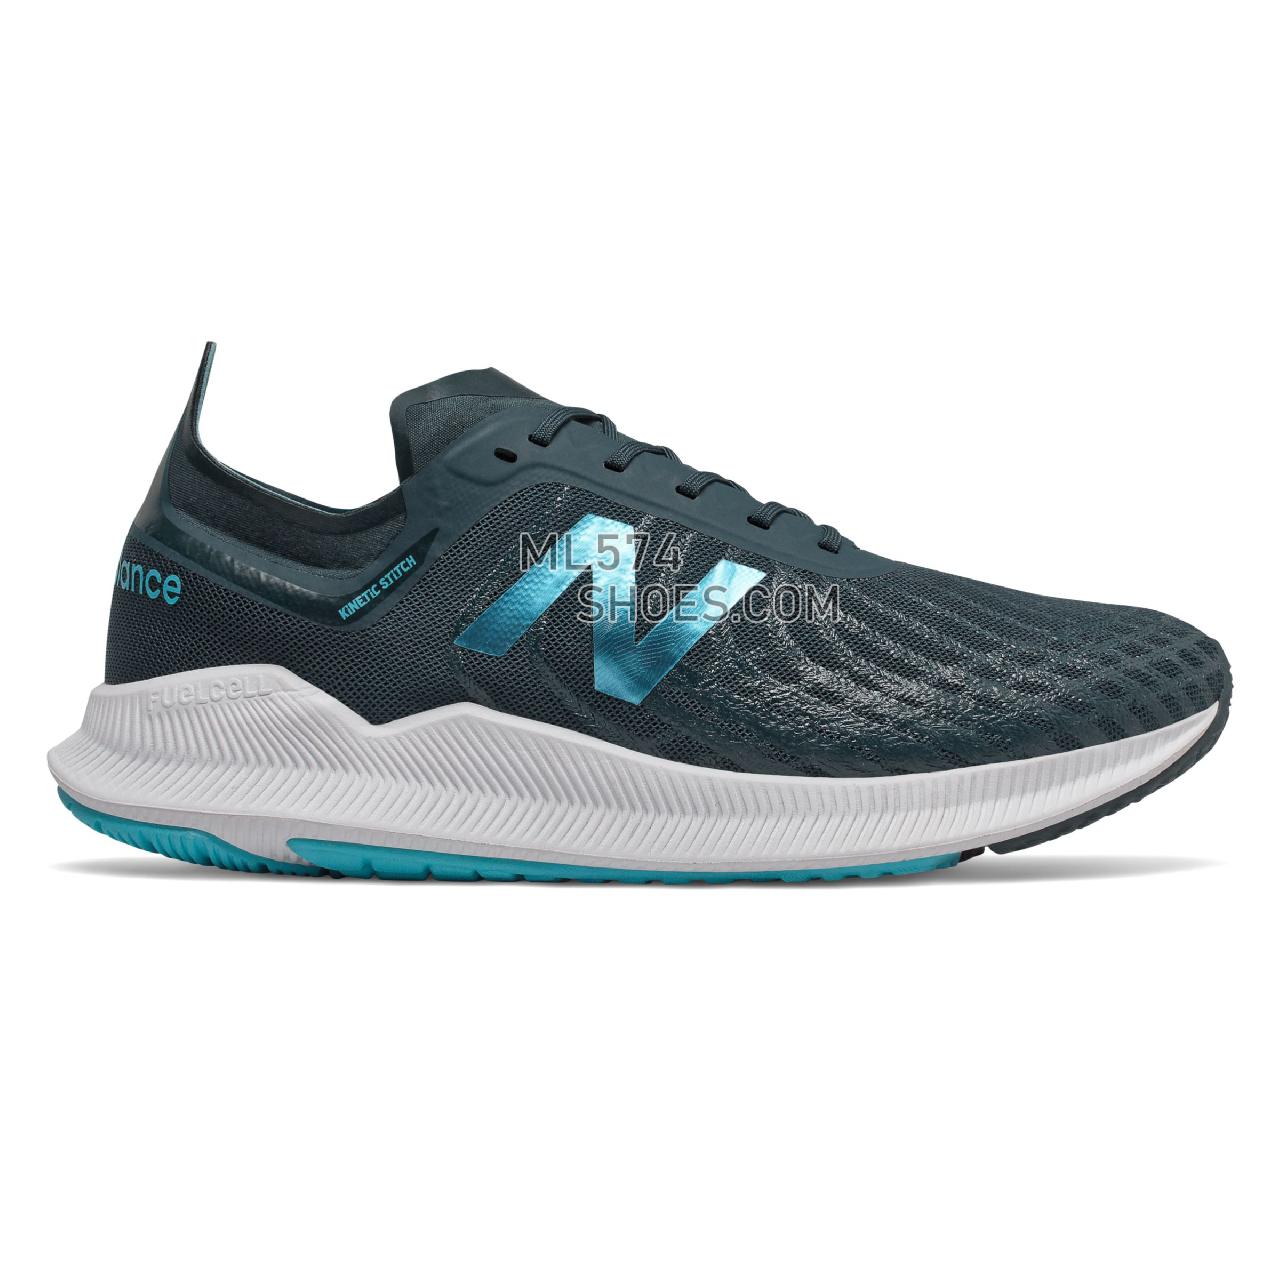 New Balance FuelCell Tekela - Men's Neutral Running - Supercell with Bayside - MFCTKLB